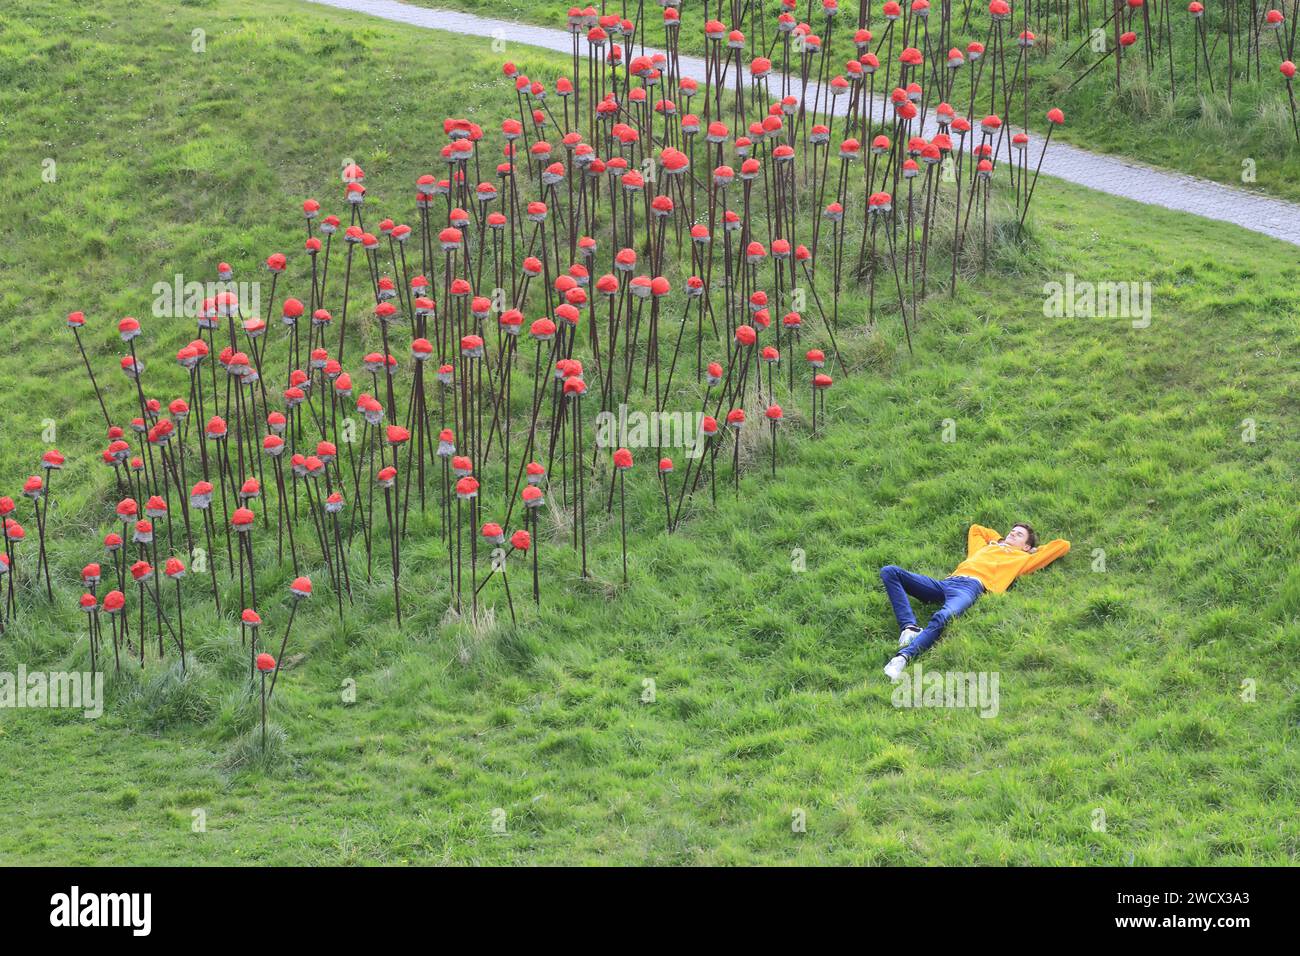 France, Nord, Dunkirk, sculpture garden of the LAAC (Lieu d'Art et Action Contemporaine), relaxation on the grass next to an outdoor work representing poppies in concrete and scrap metal by local artists Steve Abraham and Nicolas Messager Stock Photo